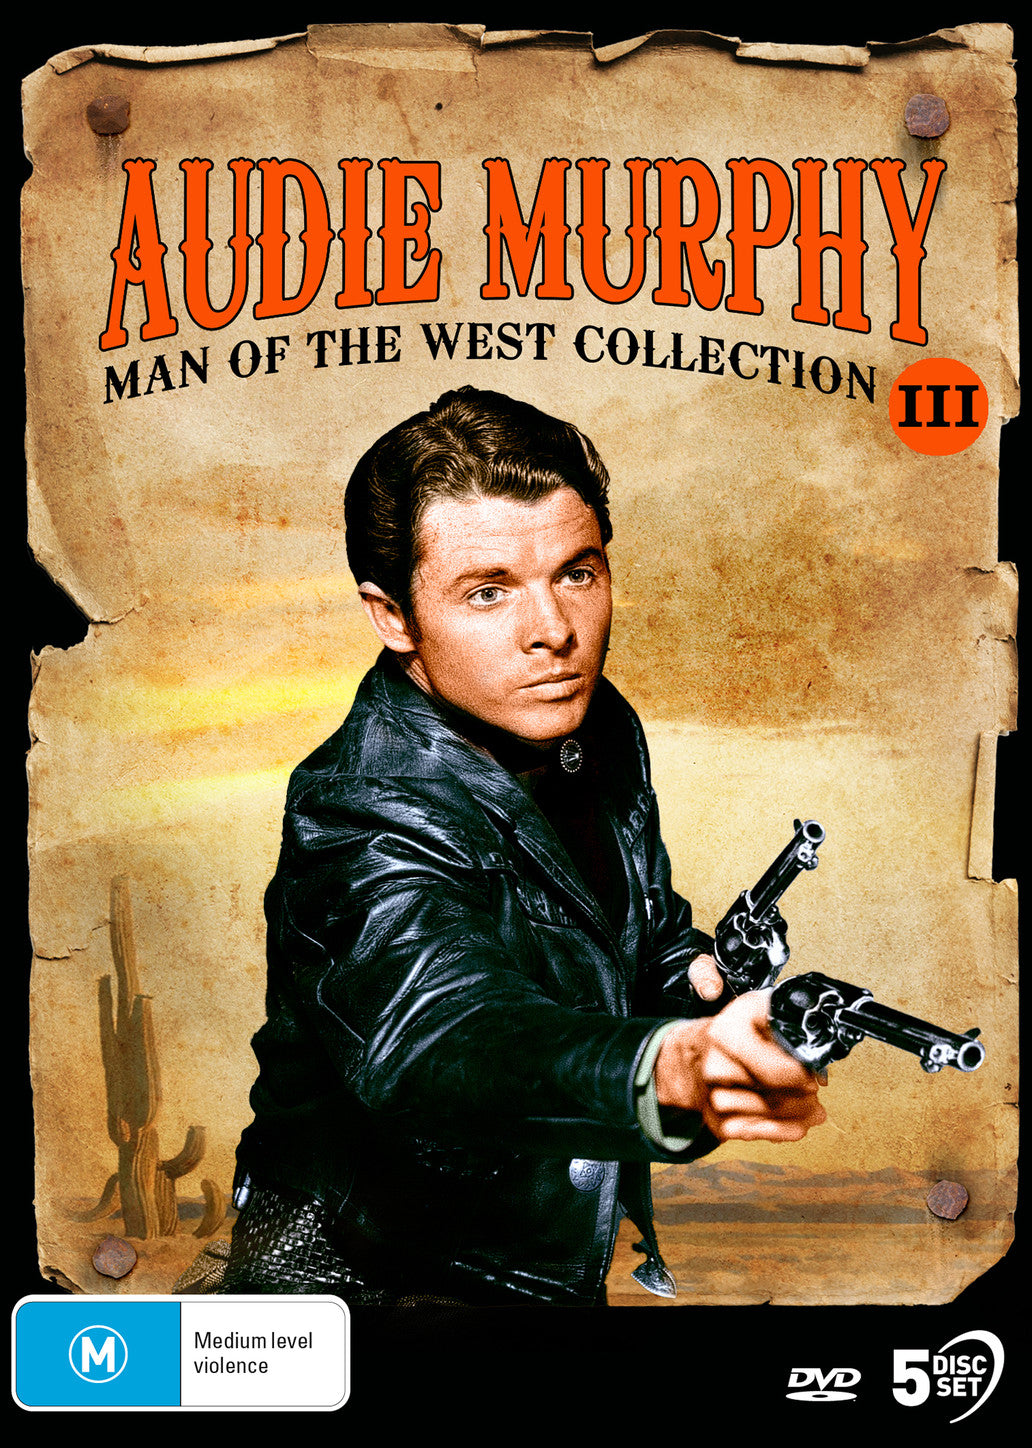 AUDIE MURPHY MAN OF THE WEST COLLECTION III (THE DUEL AT SILVER CREEK (1952) / GUNSMOKE (1953) / COLUMN SOUTH (1953) / DRUMS ACROSS THE RIVER (1954) / BULLET FOR A BADMAN (1964))